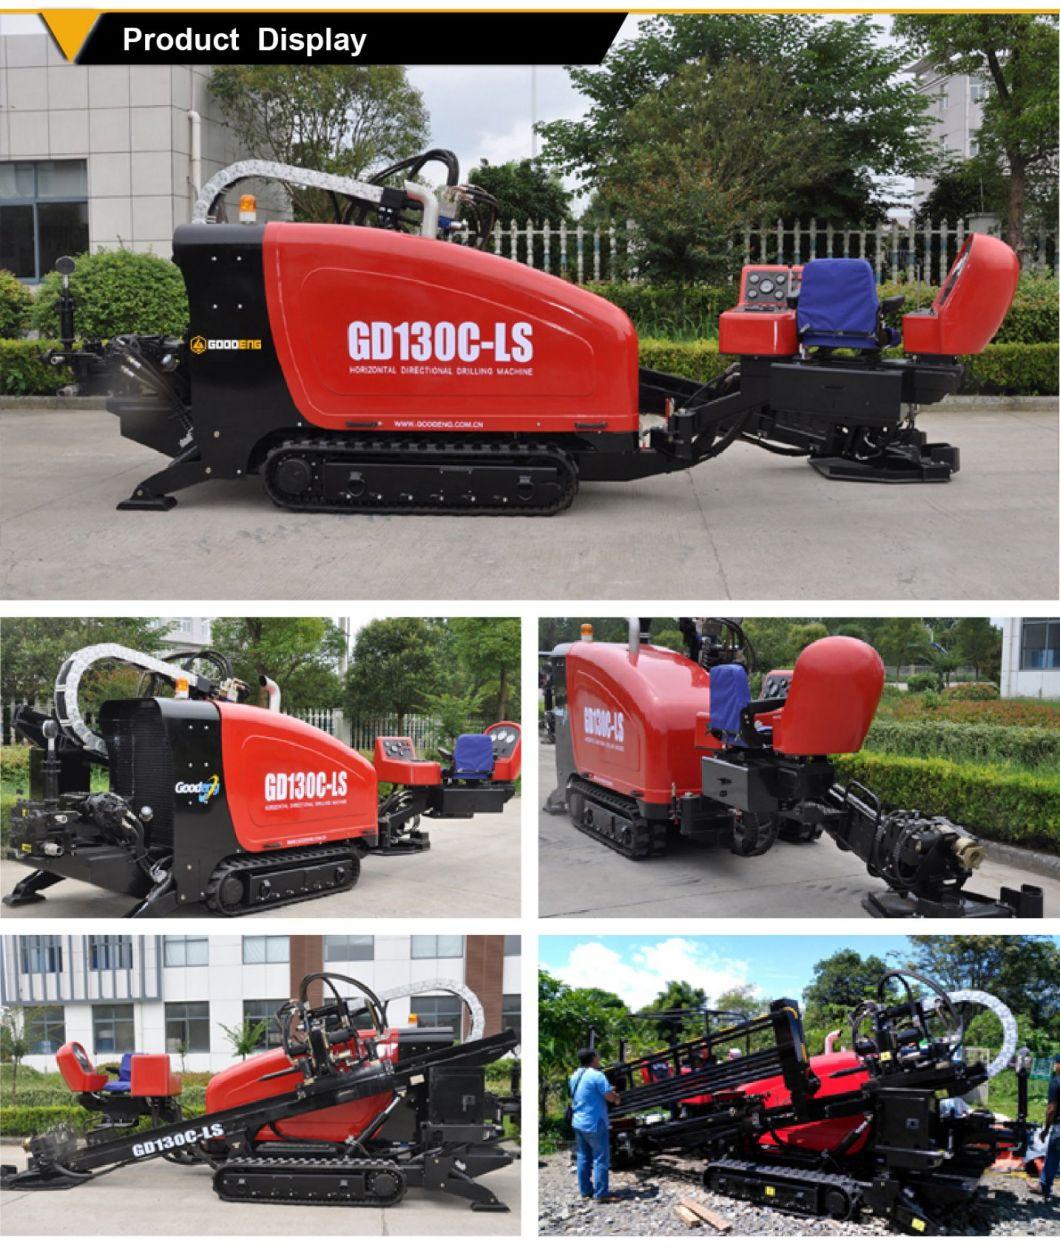 GD130C-LS Goodeng 13ton hdd machine with CE